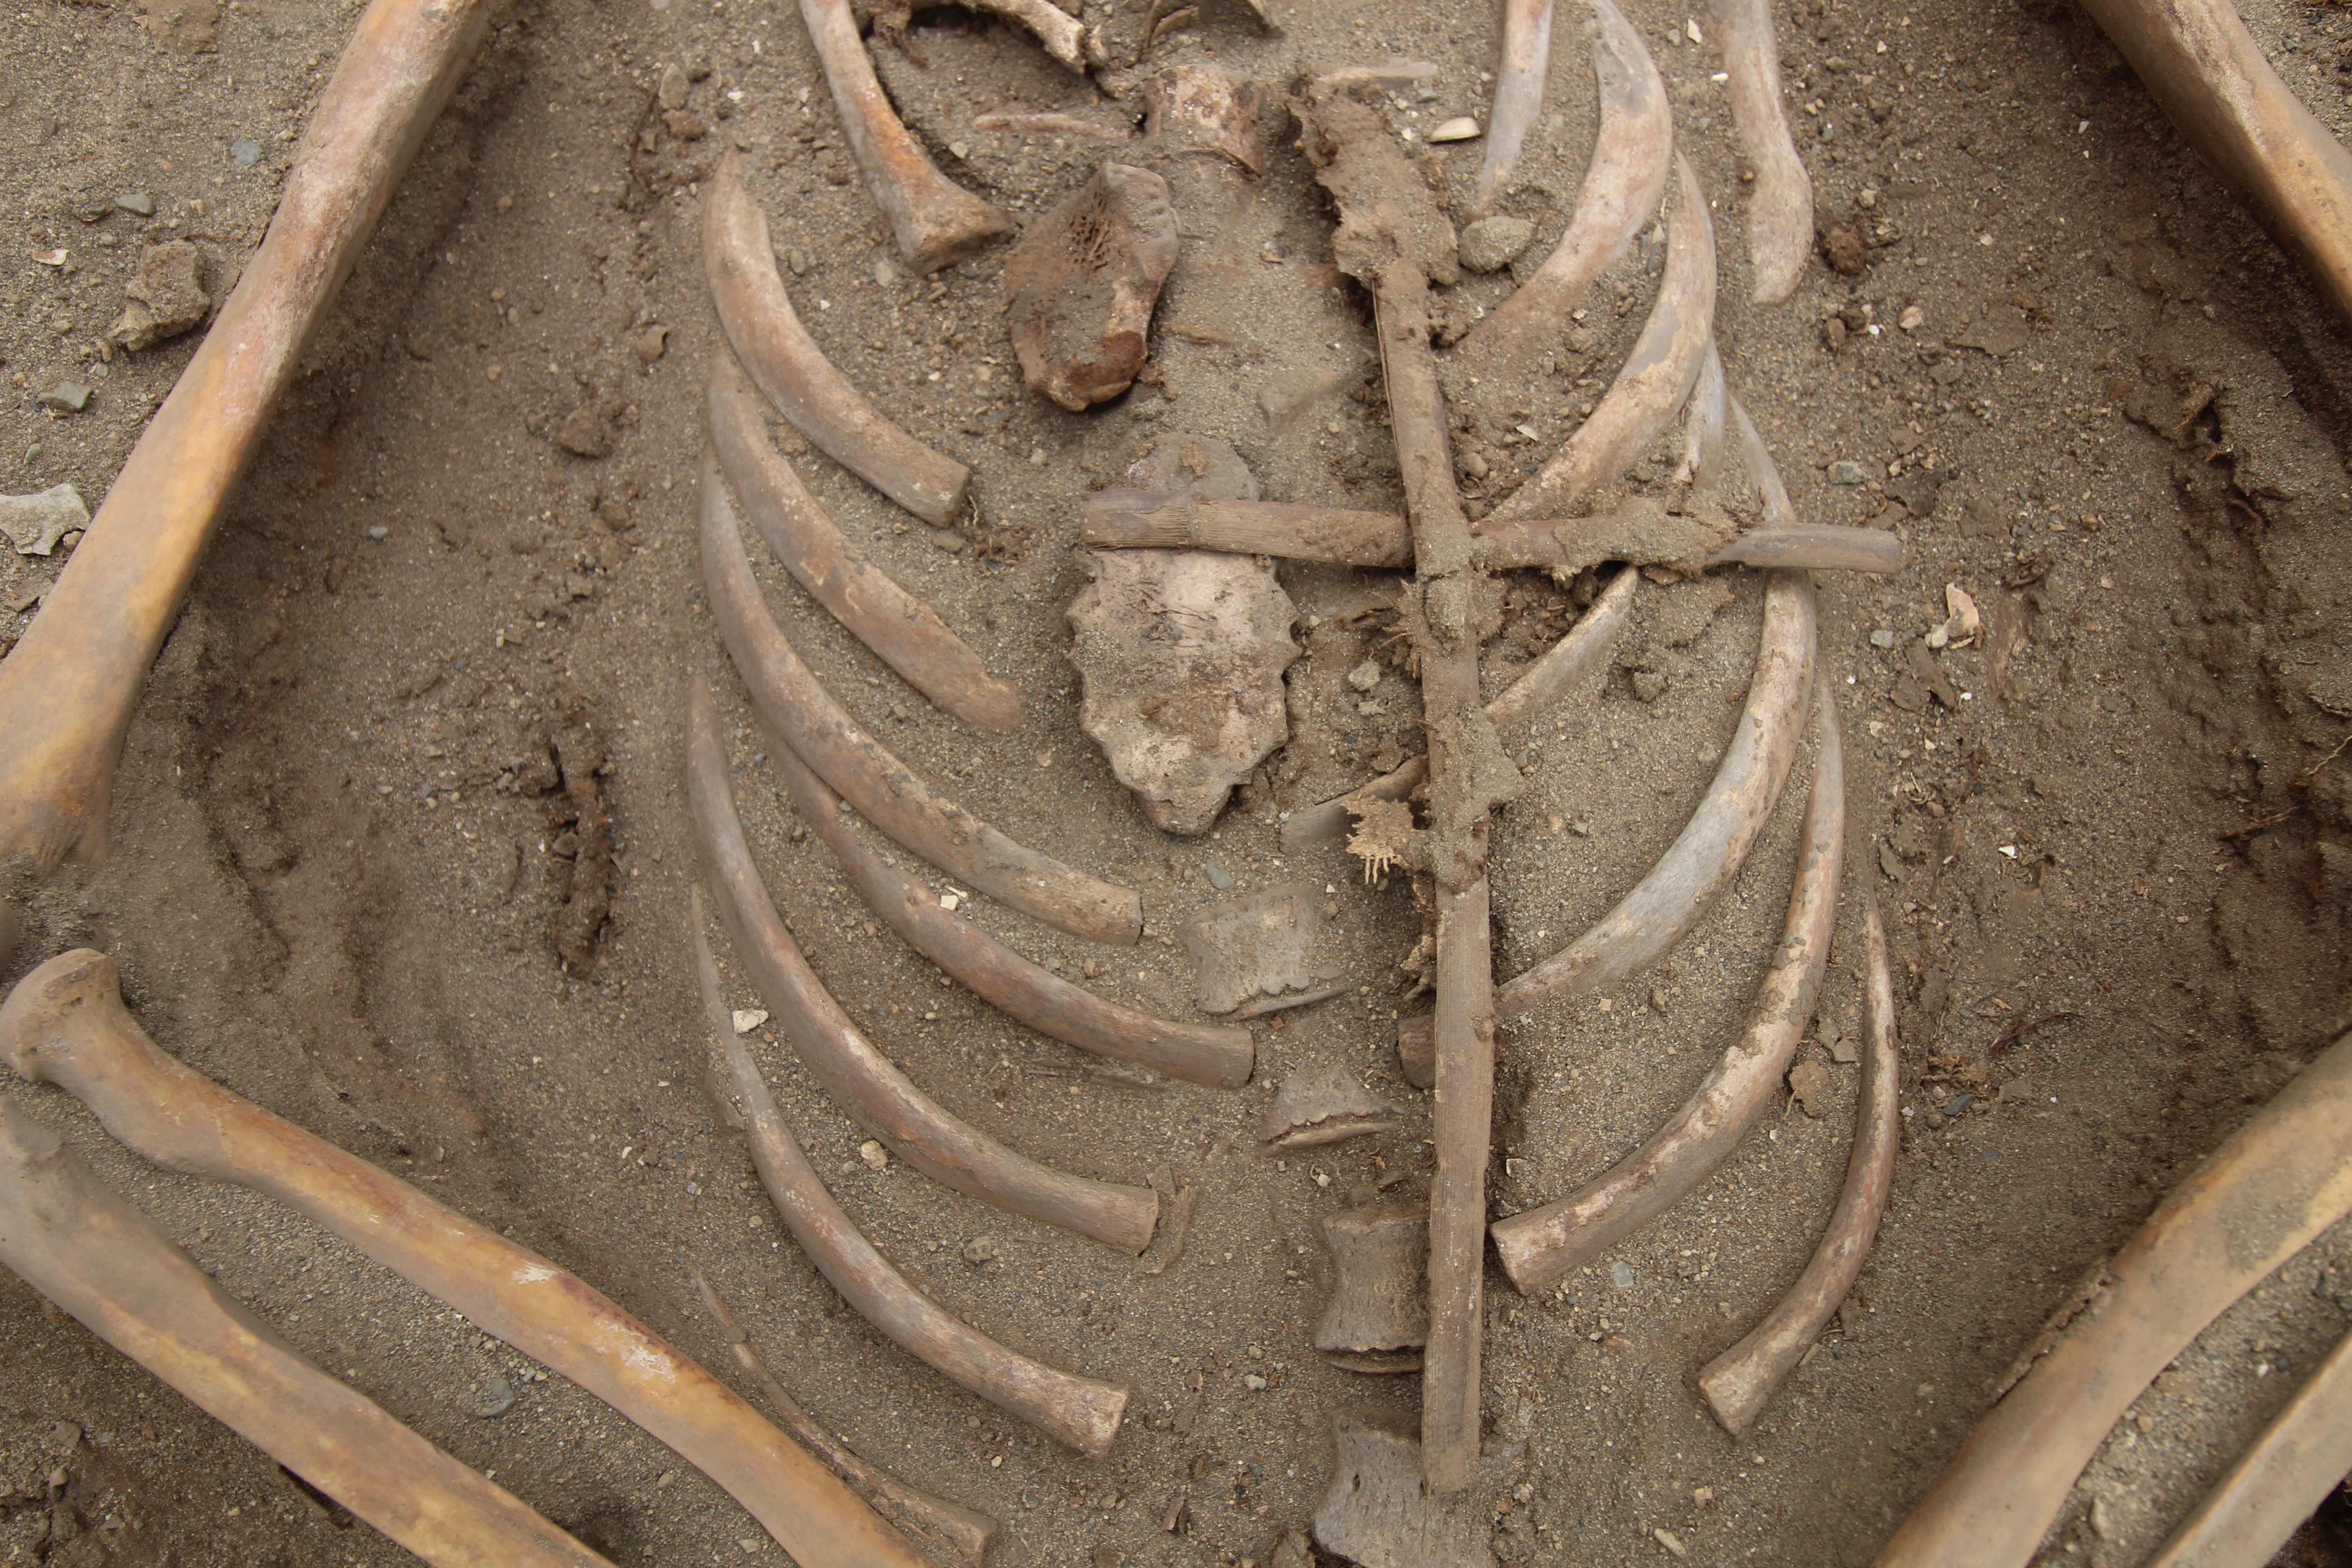 A close up of an adult skeleton showing a reed cross